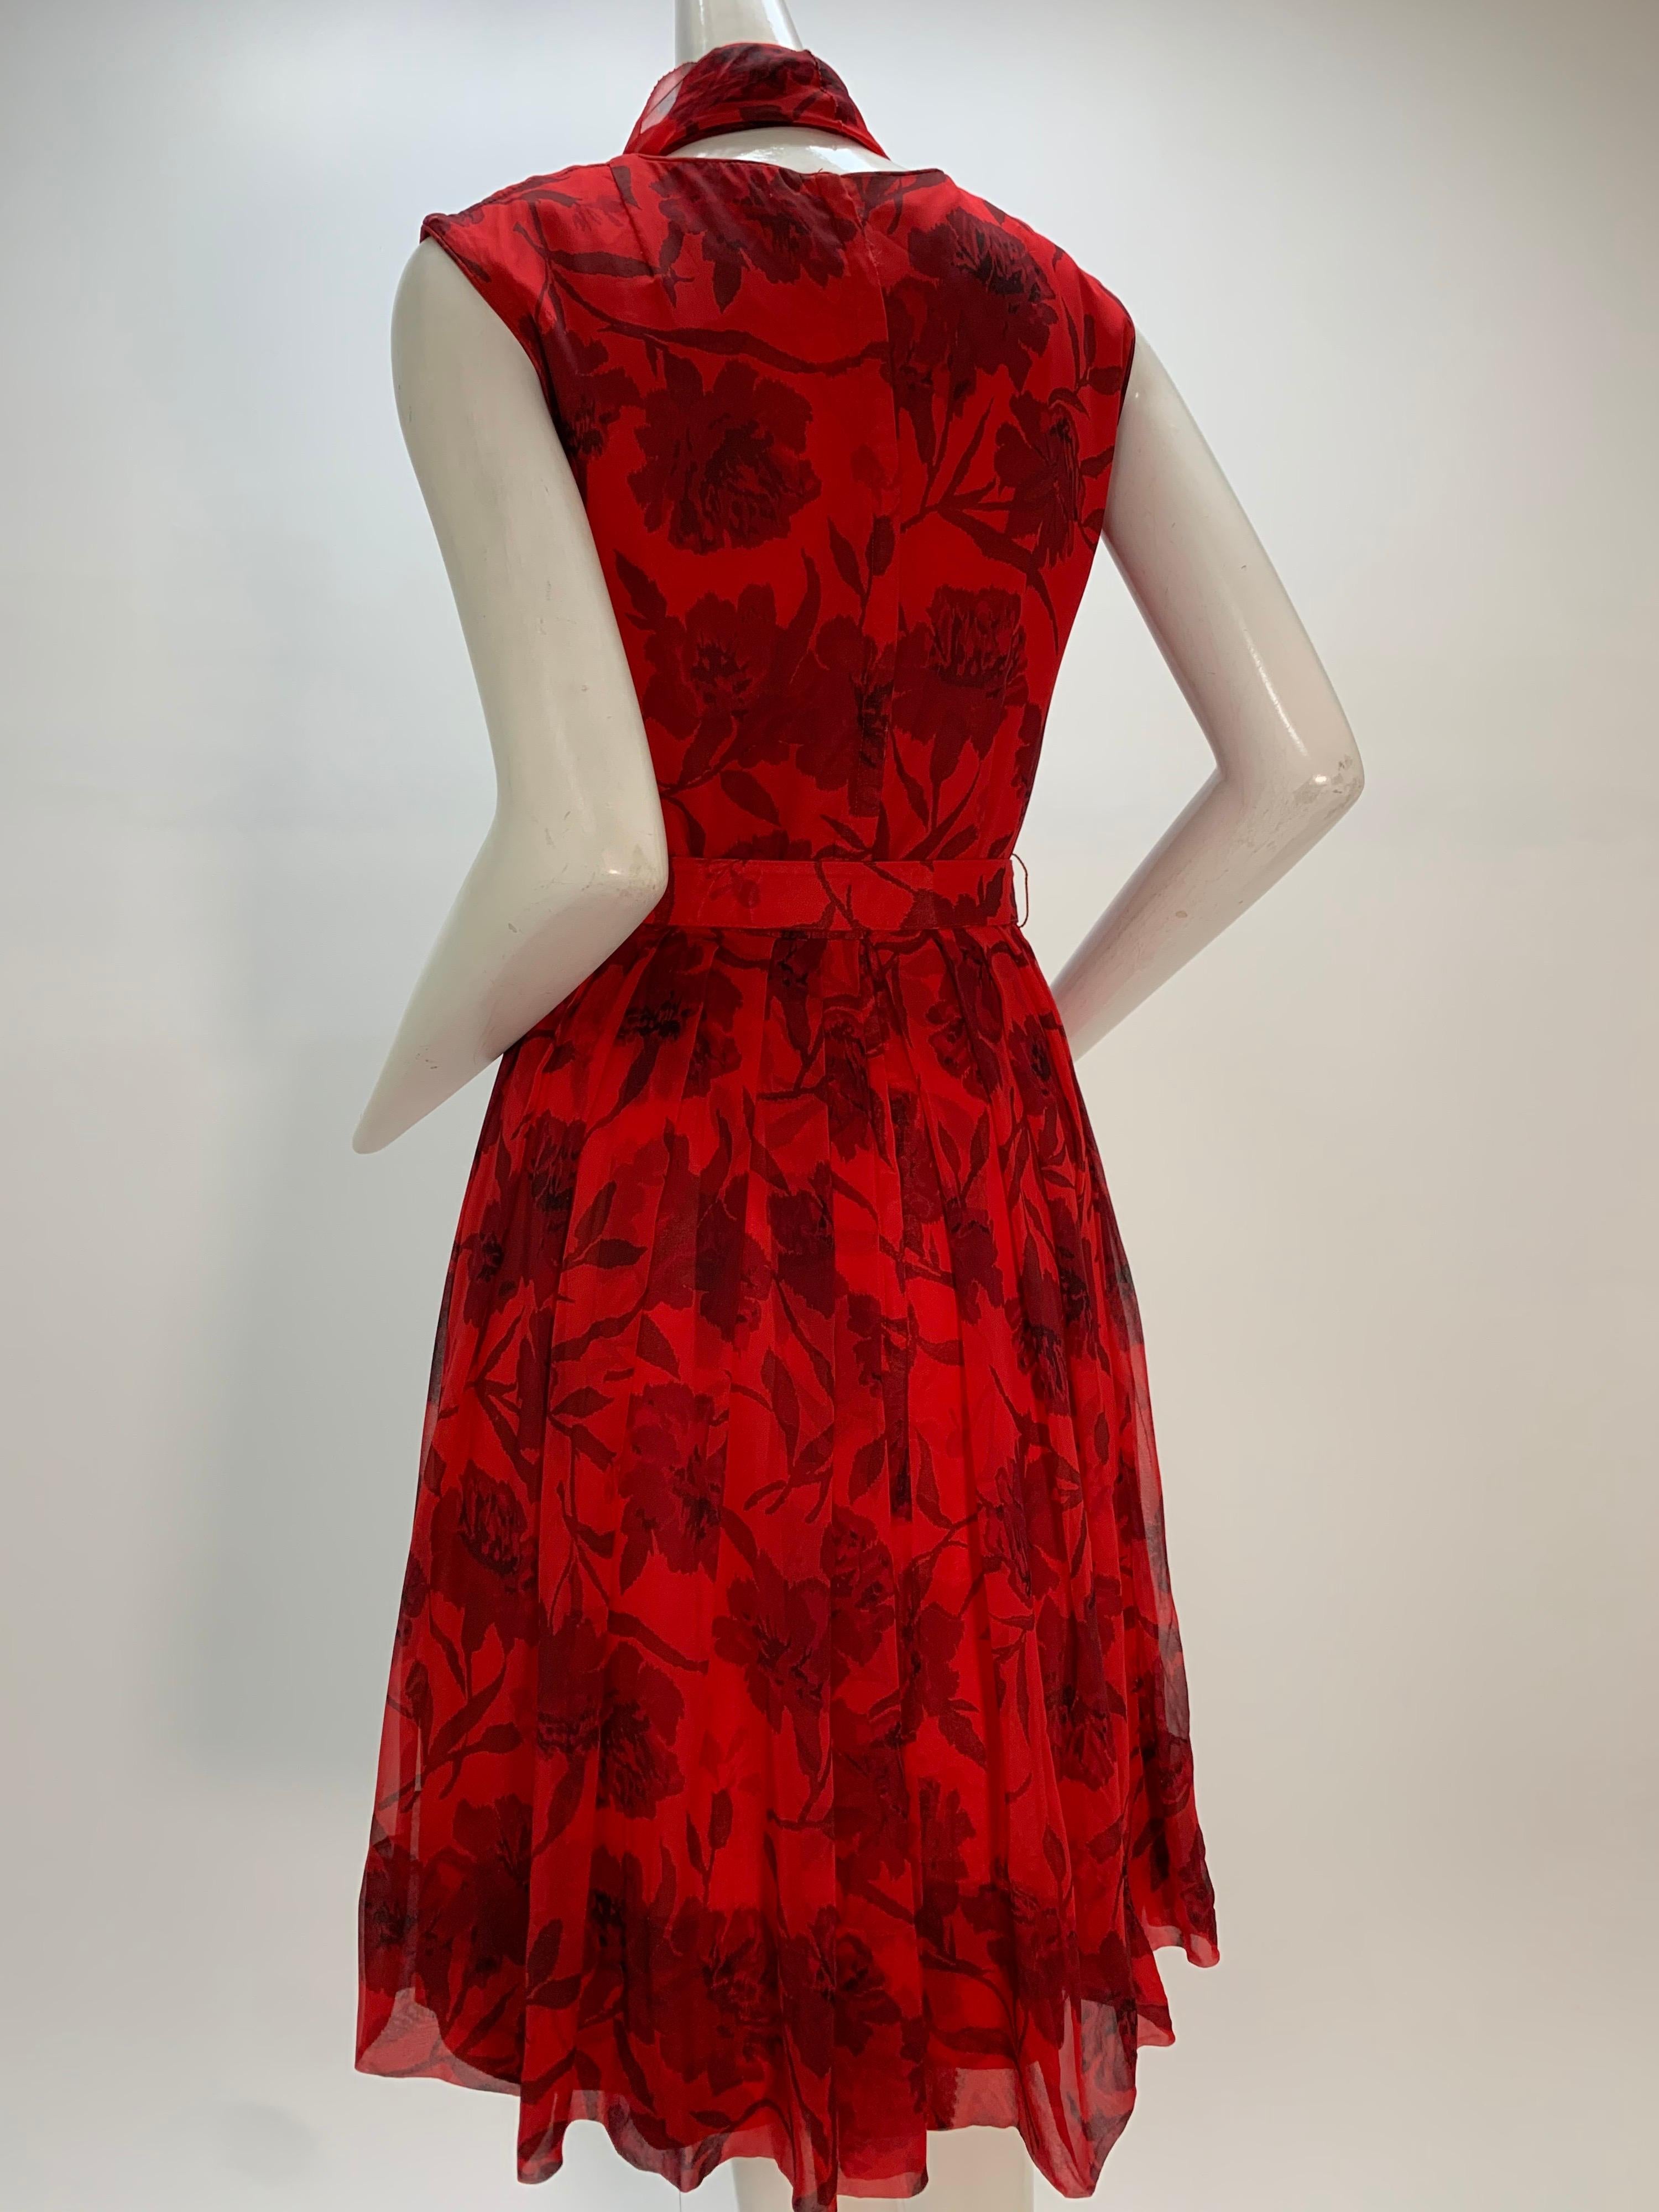 Women's 1960s Nelly Don Red Carnation Print Chiffon Sleeveless Cocktail Dress